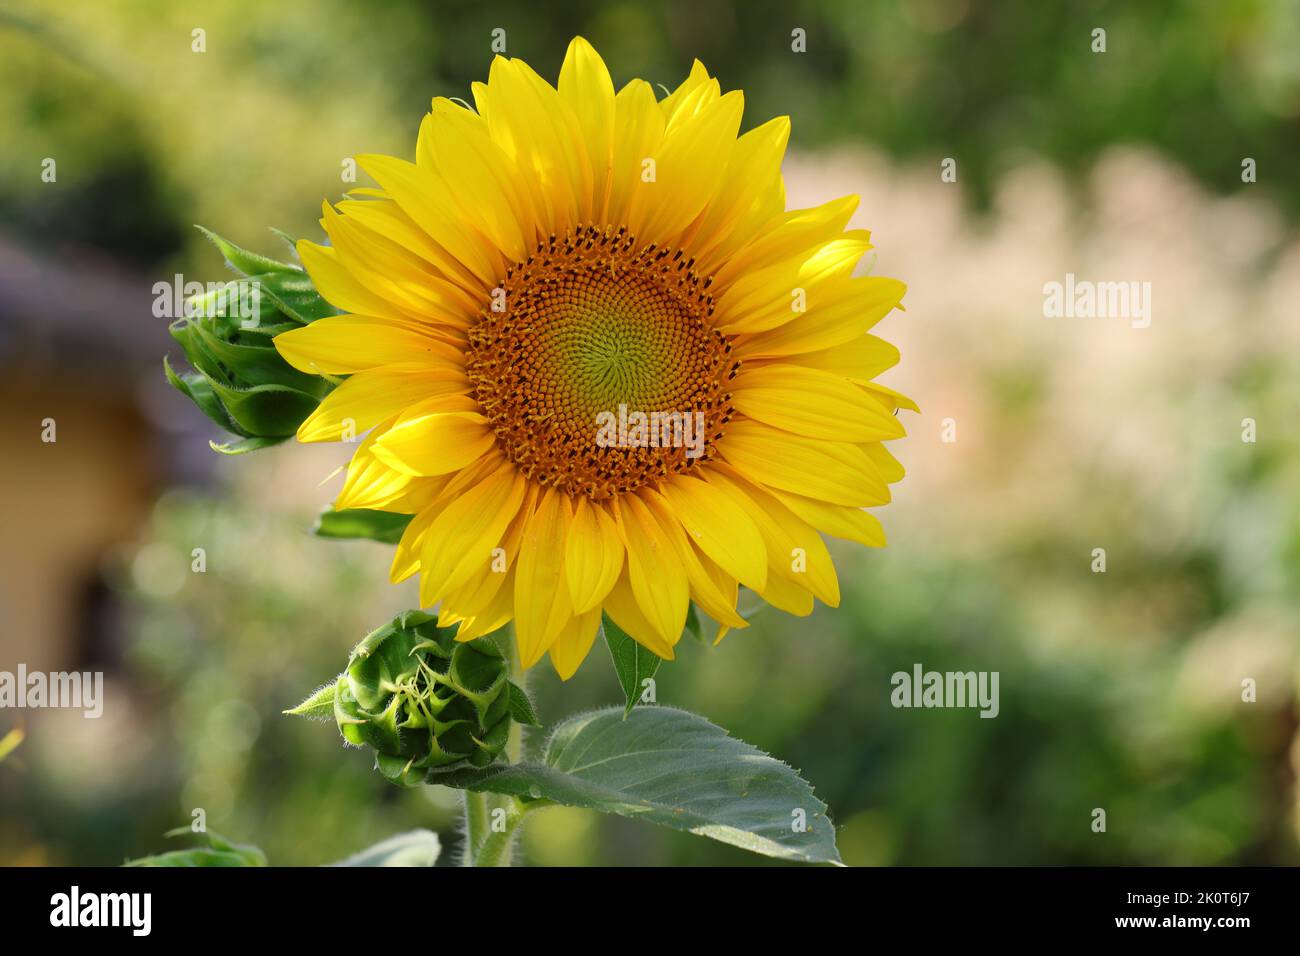 a beautiful large helianthus annuus flower against a blurry background Stock Photo